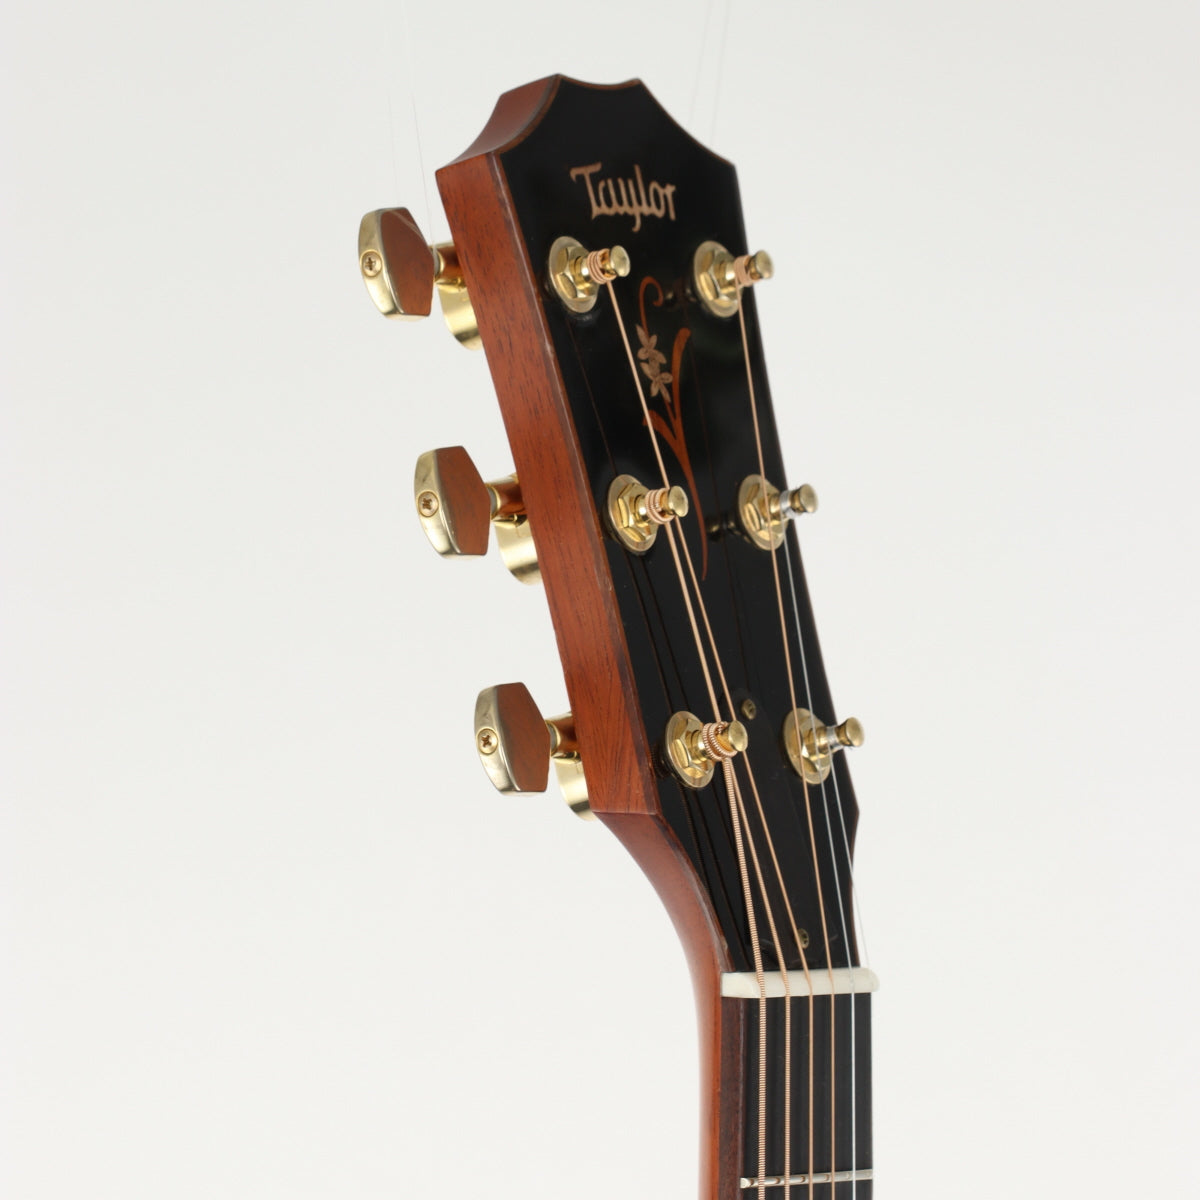 [SN 1105302098] USED Taylor Taylor / K22ce Grand Concert [20]